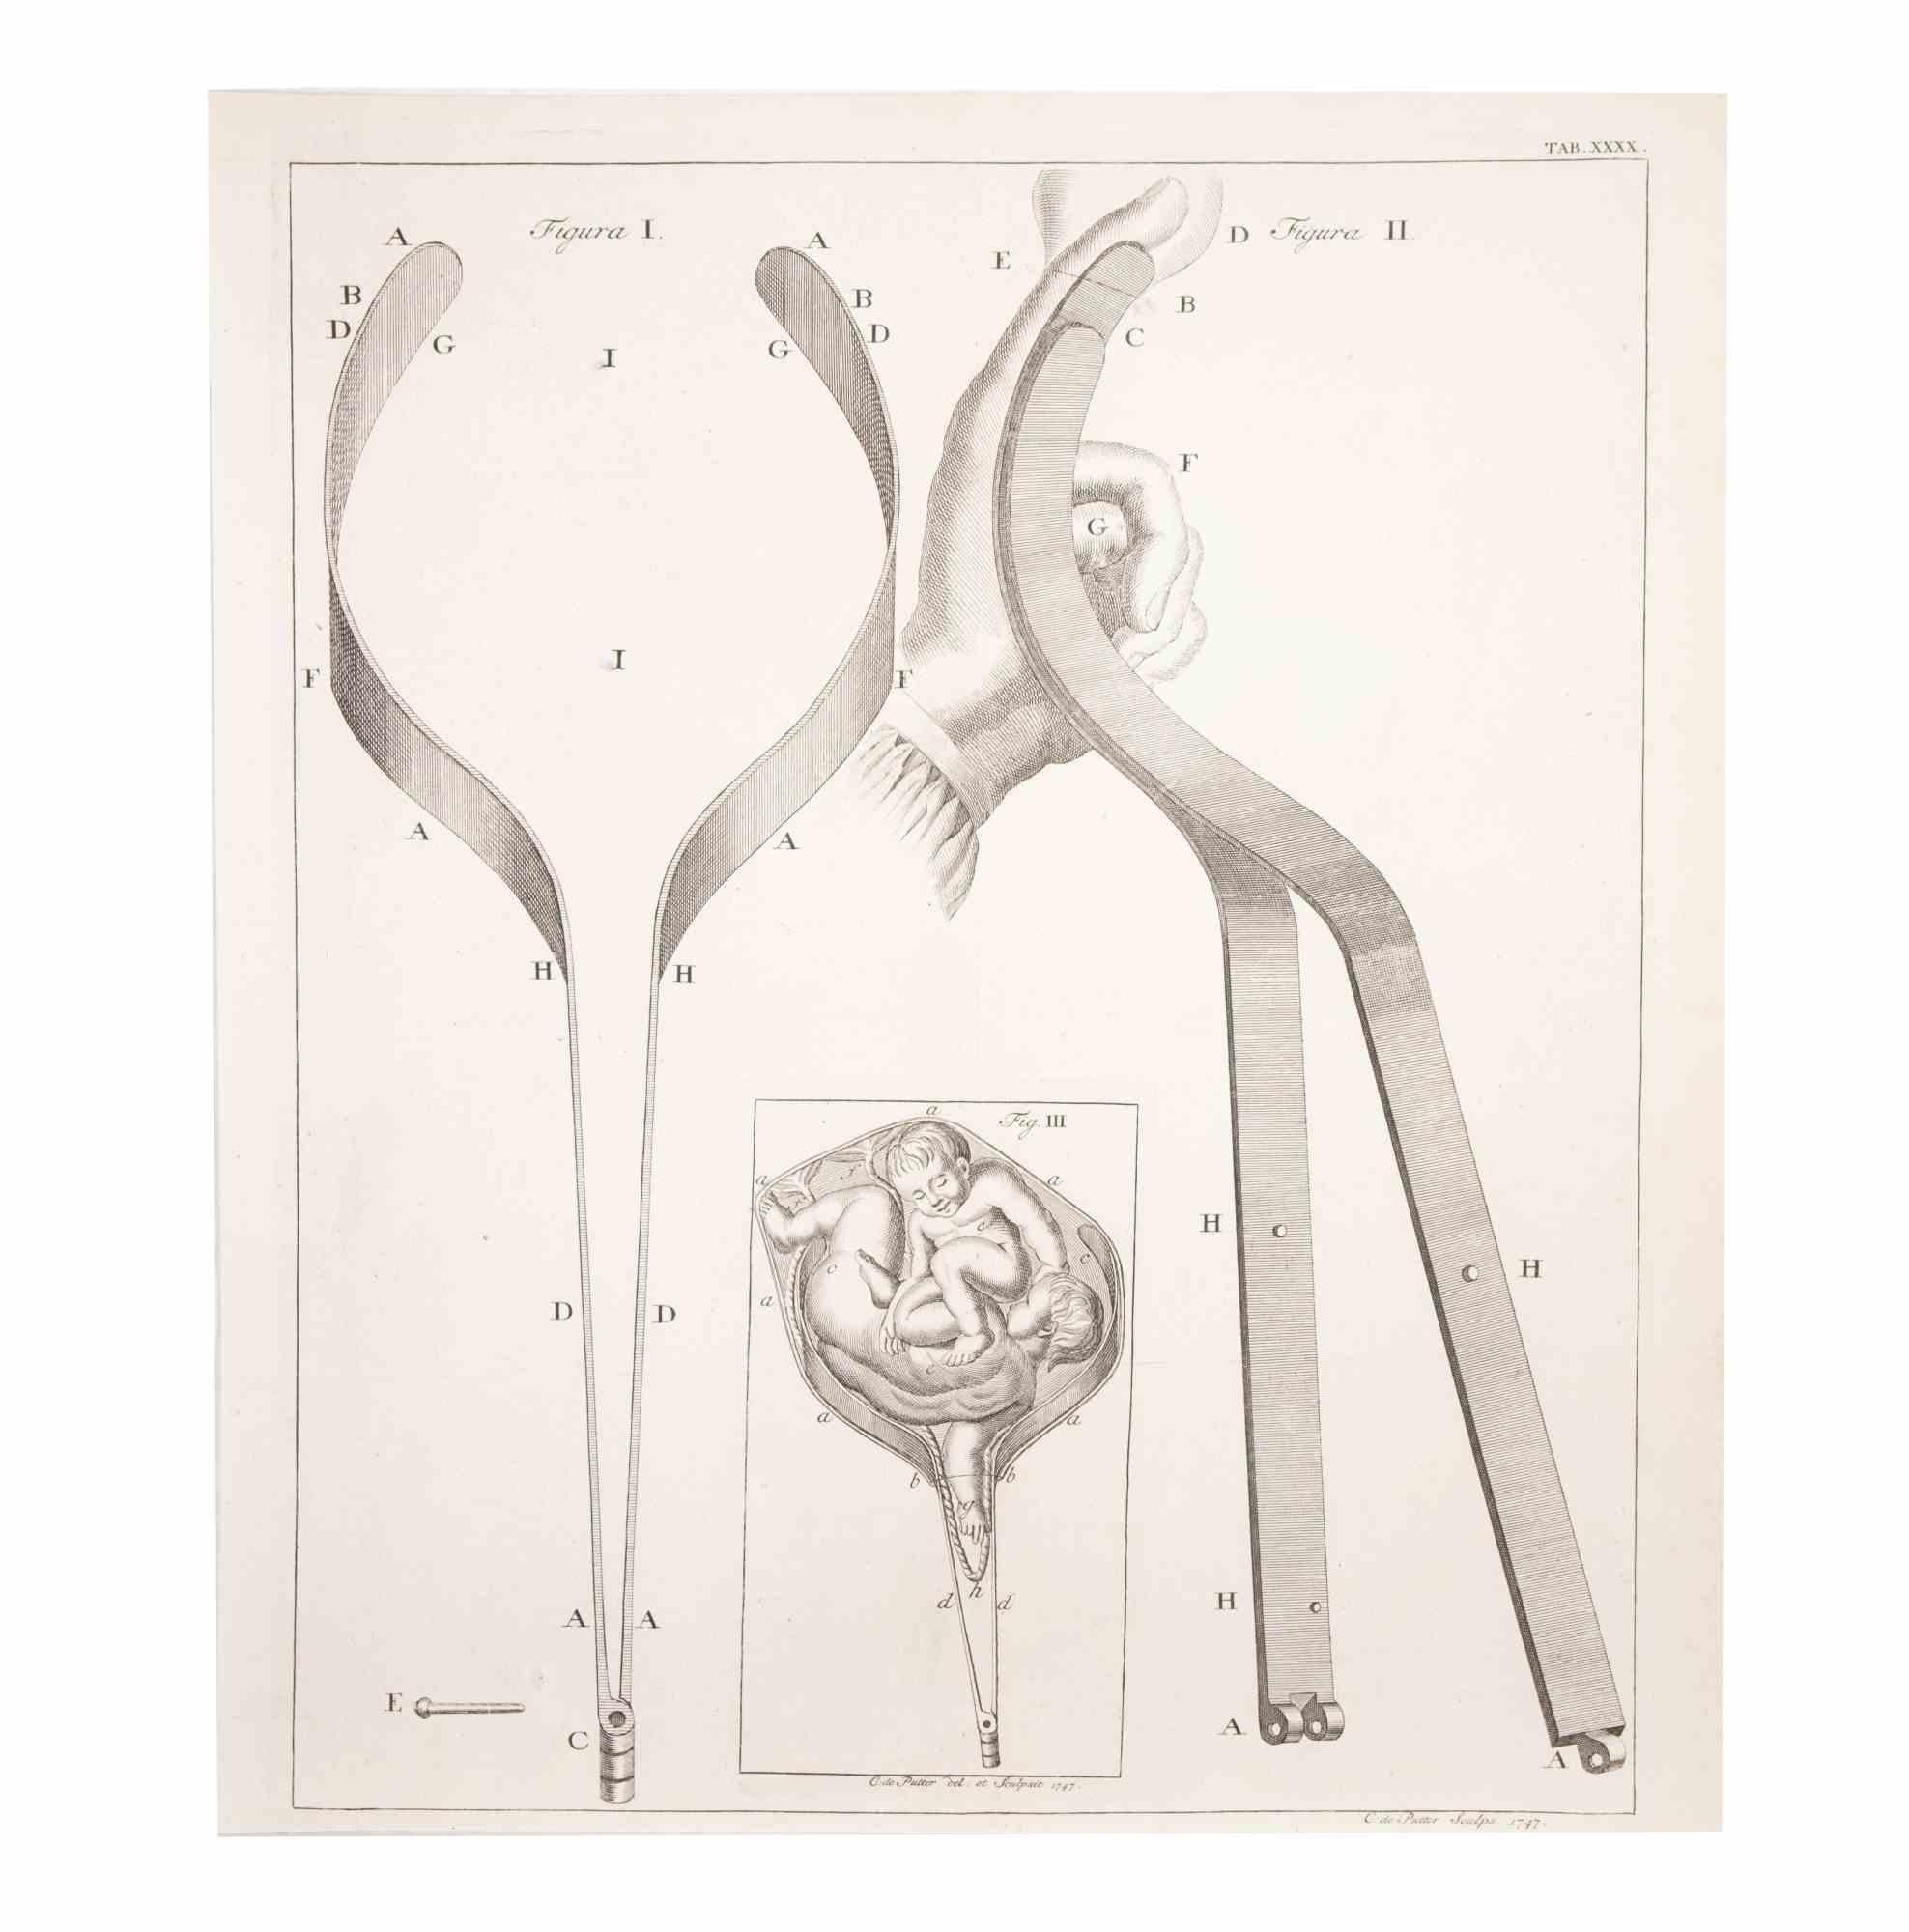 Surgical Instruments is part of the Suite Institutiones Chirurgicae by Lorenz Heister. Amsterdam, Janssonius-Waesberg, 1750.

Etching on paper.

The work belongs to the Latin edition of the famous work by the founder of modern surgery, first